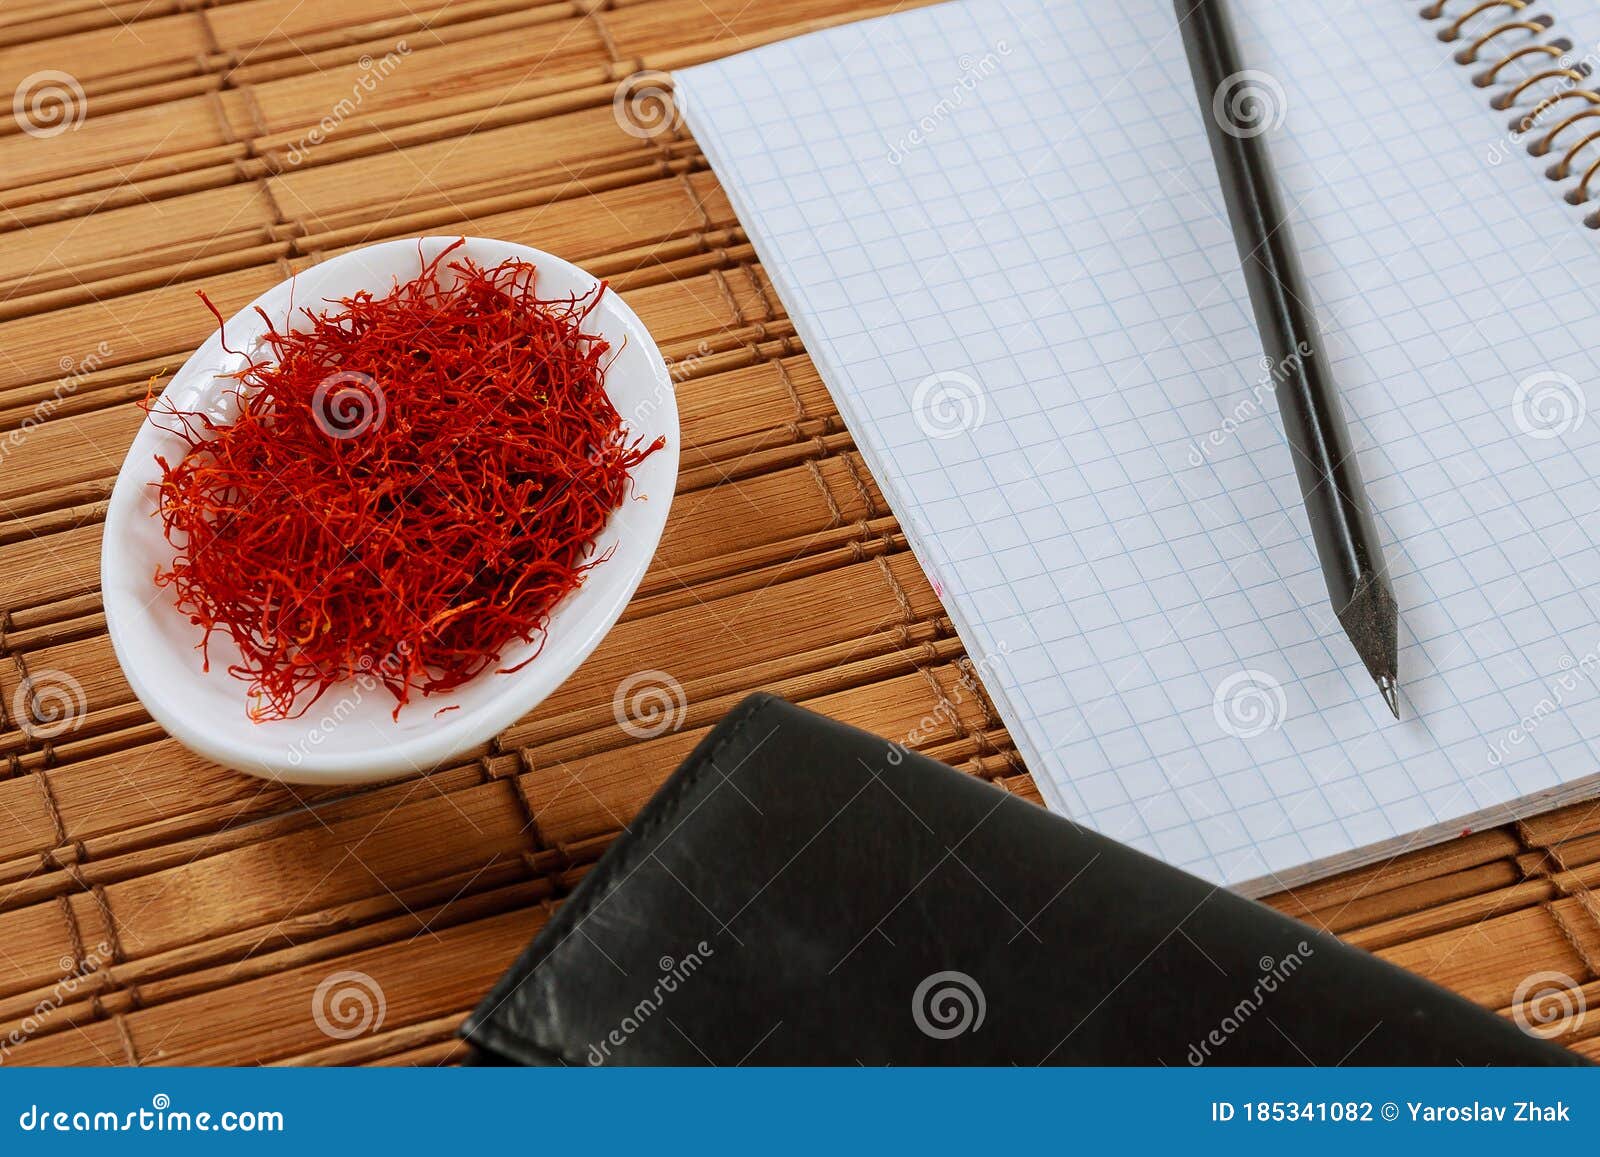 dry saffron spice on a white plate on wooden background with copybook. copy space